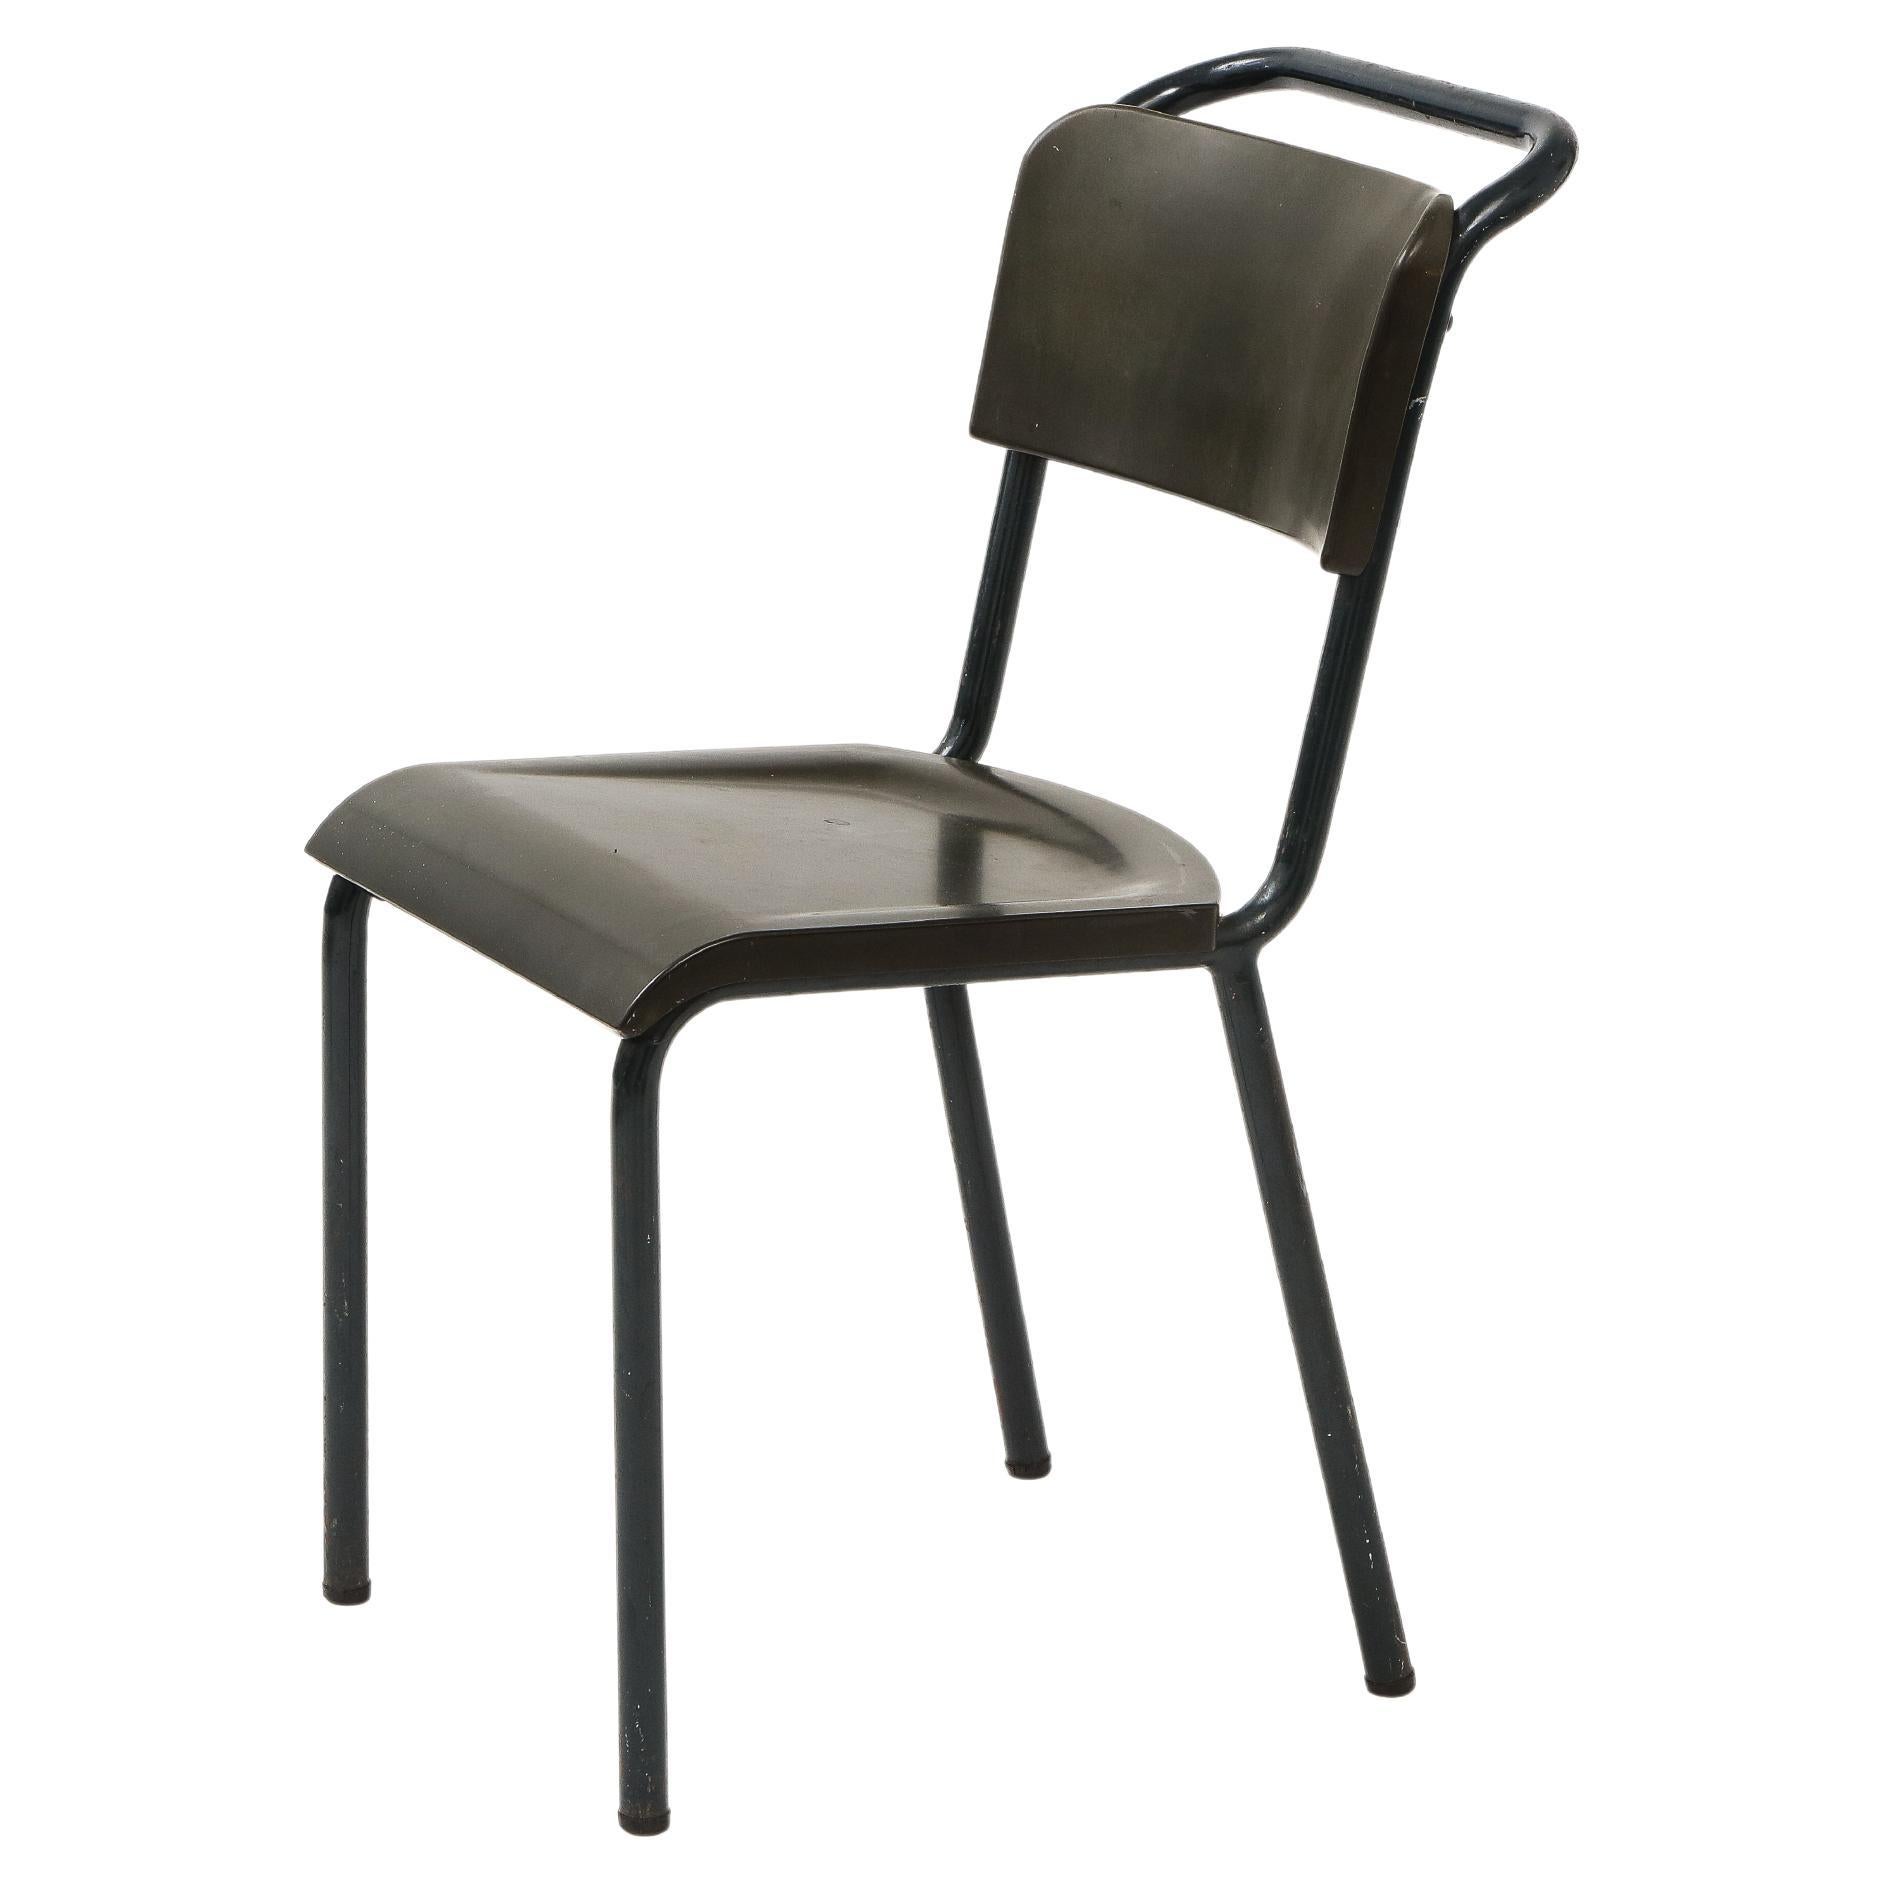 Single Industrial Side Chair in Style of Pierre Guariche, 1950’s, France